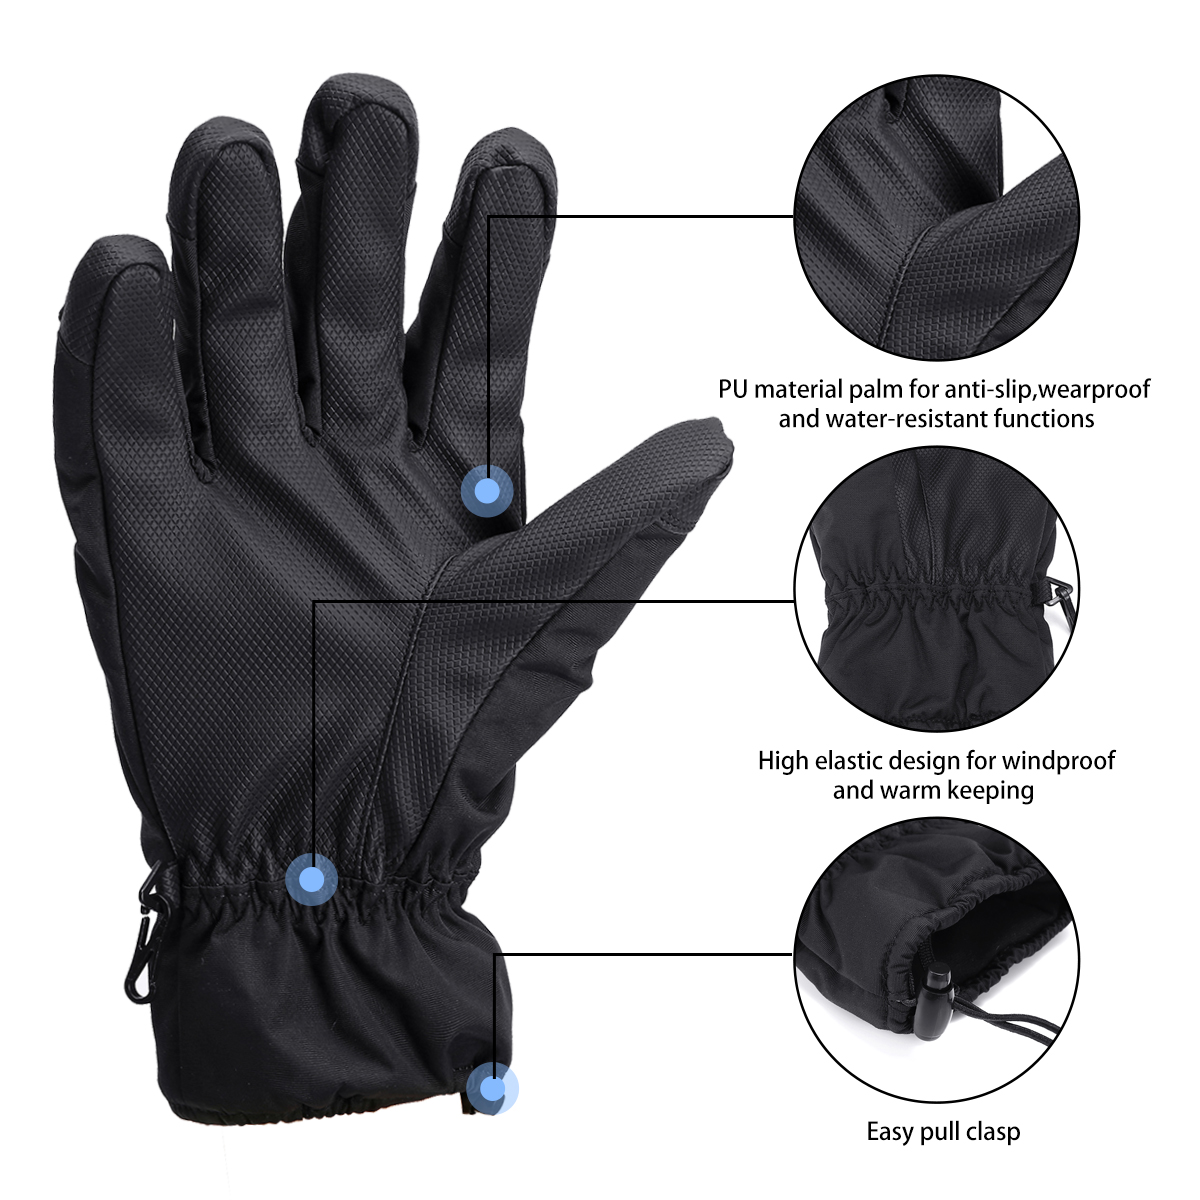 CAMTOA-Winter-Skiing-Gloves-3M-Thinsulate-Warm-Waterproof-Breathable-Snow-Gloves-for-Men-and-Women-1397724-5